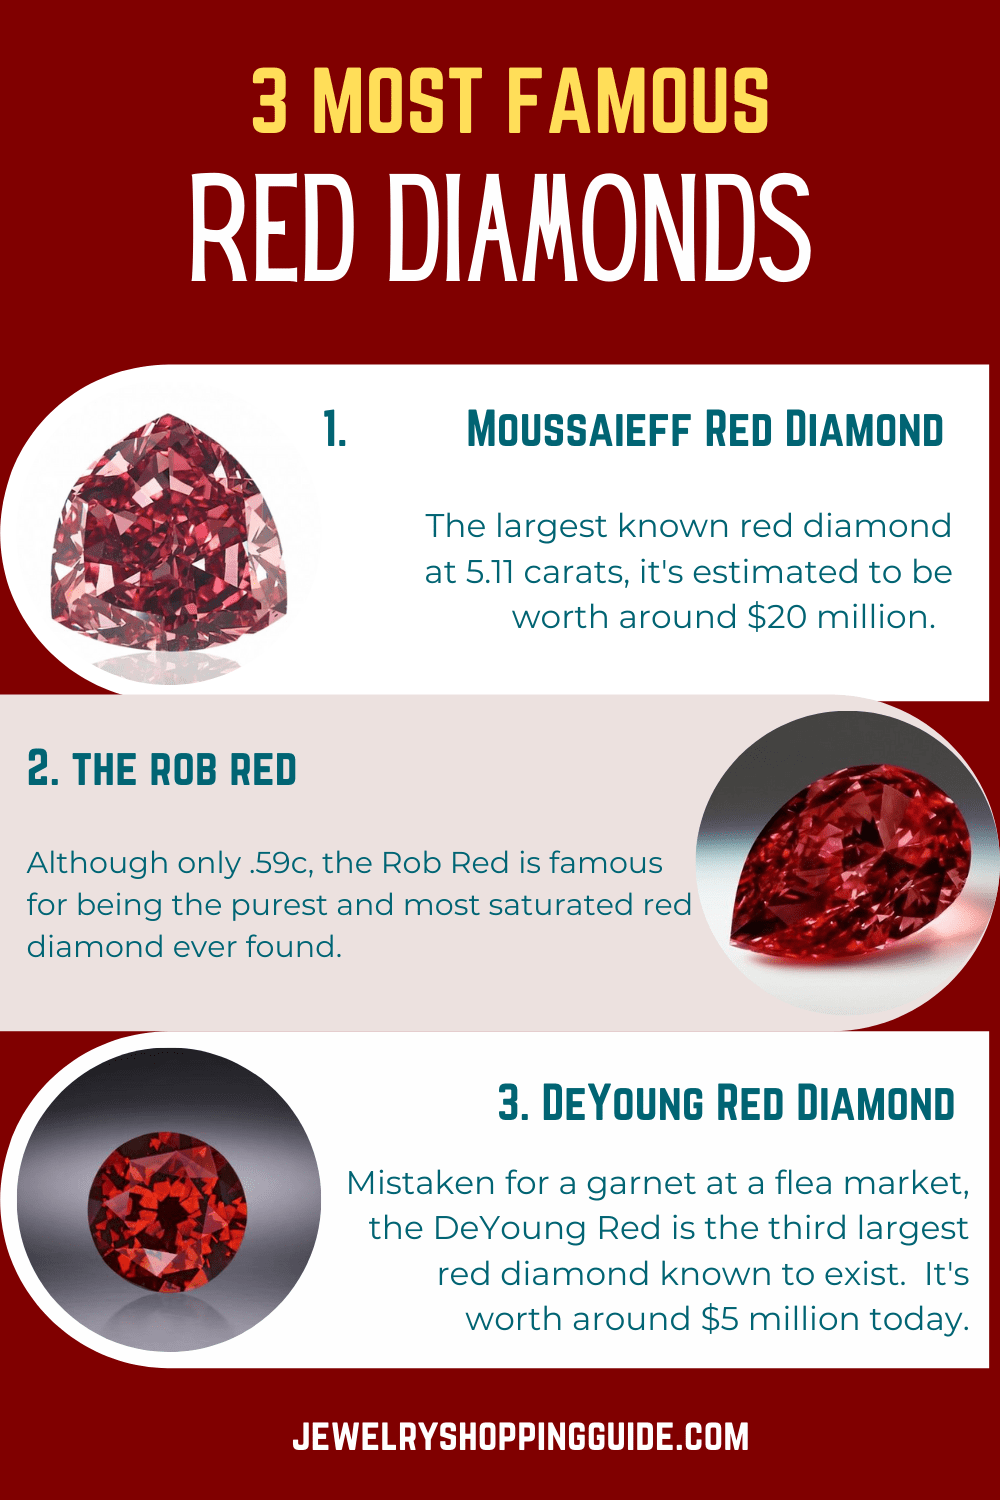 Most famous red diamonds